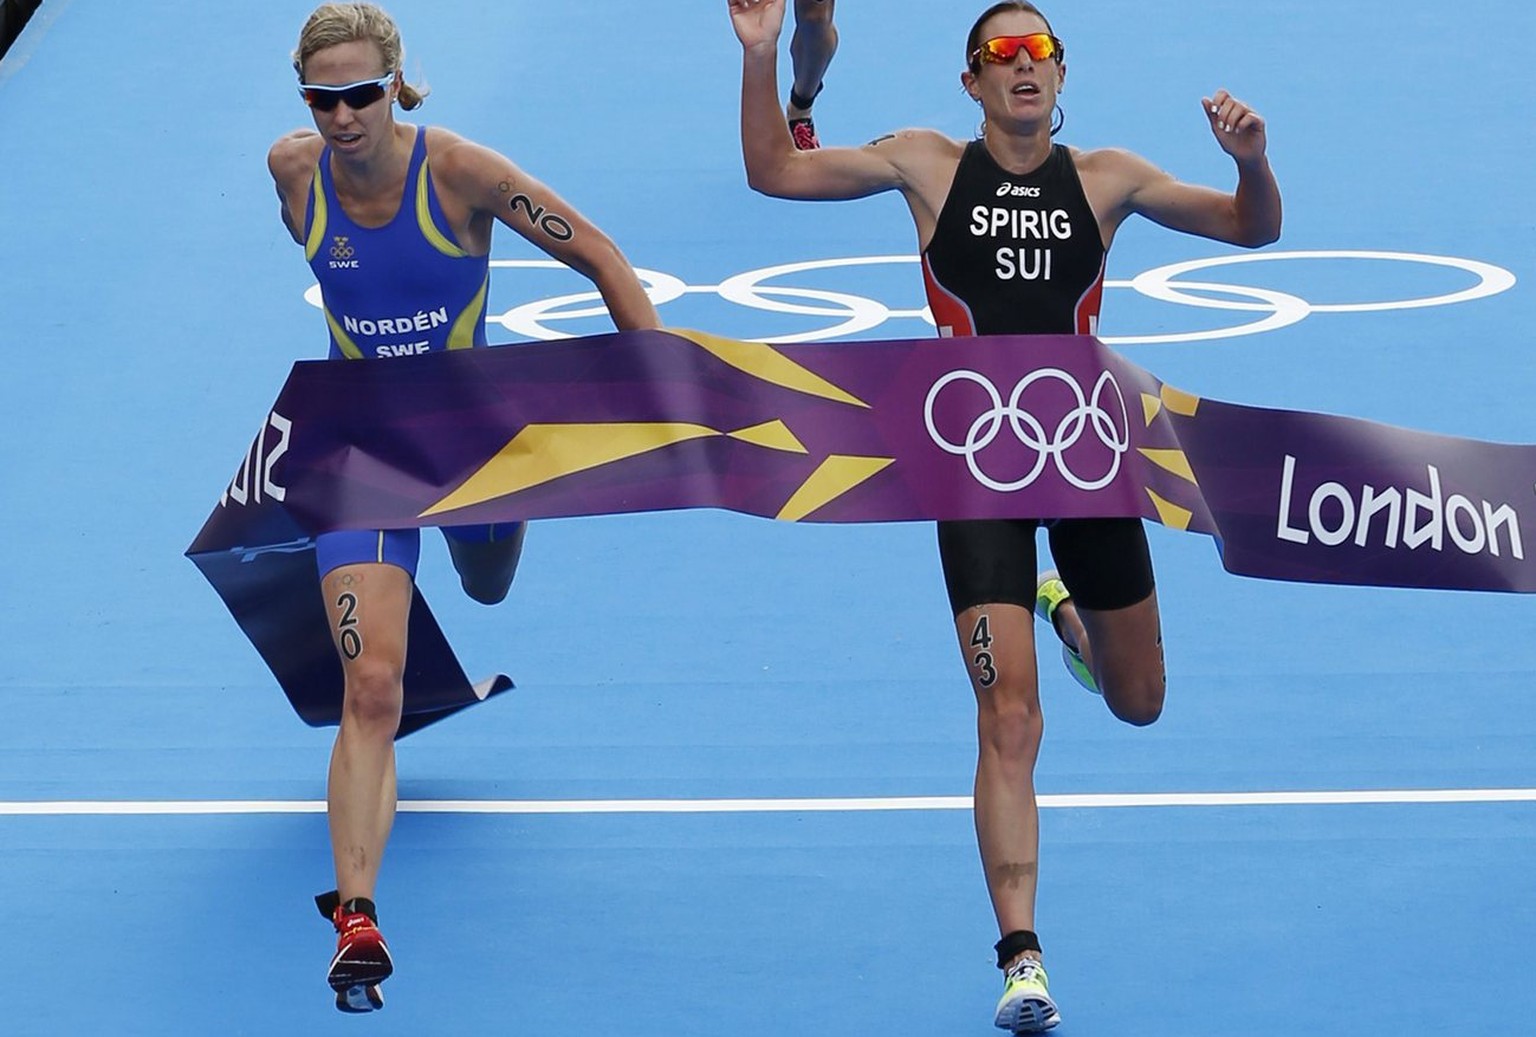 epa03339795 Nicola Spirig of Switzerland (R) crosses the finish line just ahead of Lisa Norden of Sweden in a sprint finish in the women&#039;s Triathlon held at Serpentine Lake in Hyde Park, in the L ...